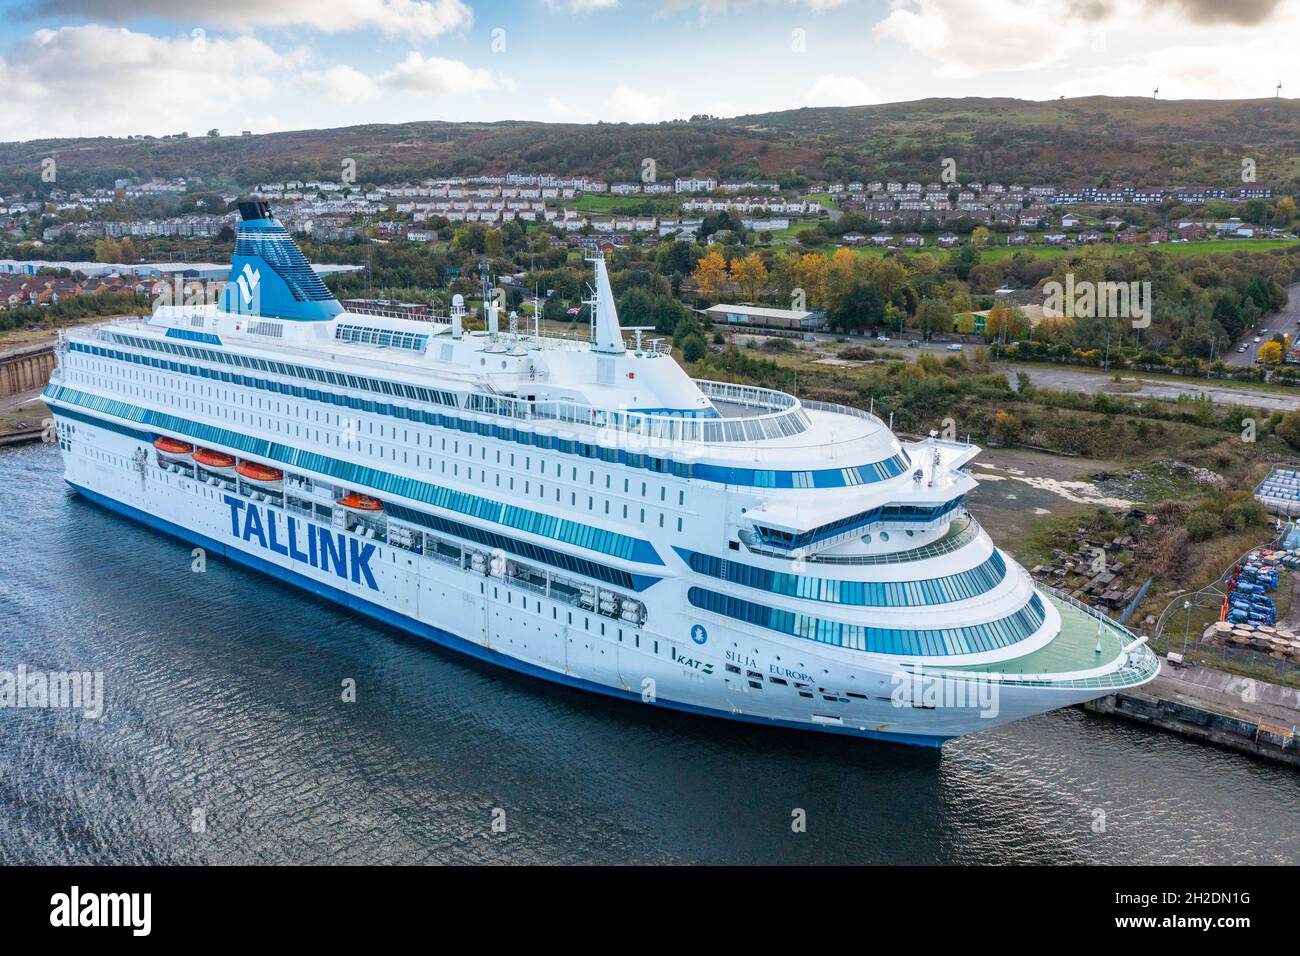 Greenock, Scotland, UK. 21st October 2021. Due to a severe shortage of accommodation for delegates attending the upcoming UN Climate Change Conference COP26 in Glasgow, two Tallink cruiseferries have arrived on the Clyde to help alleviate the situation. Pic; The Estonian flagged Silja Europa berthed today at Greenock. Iain Masterton/Alamy Live News. Stock Photo